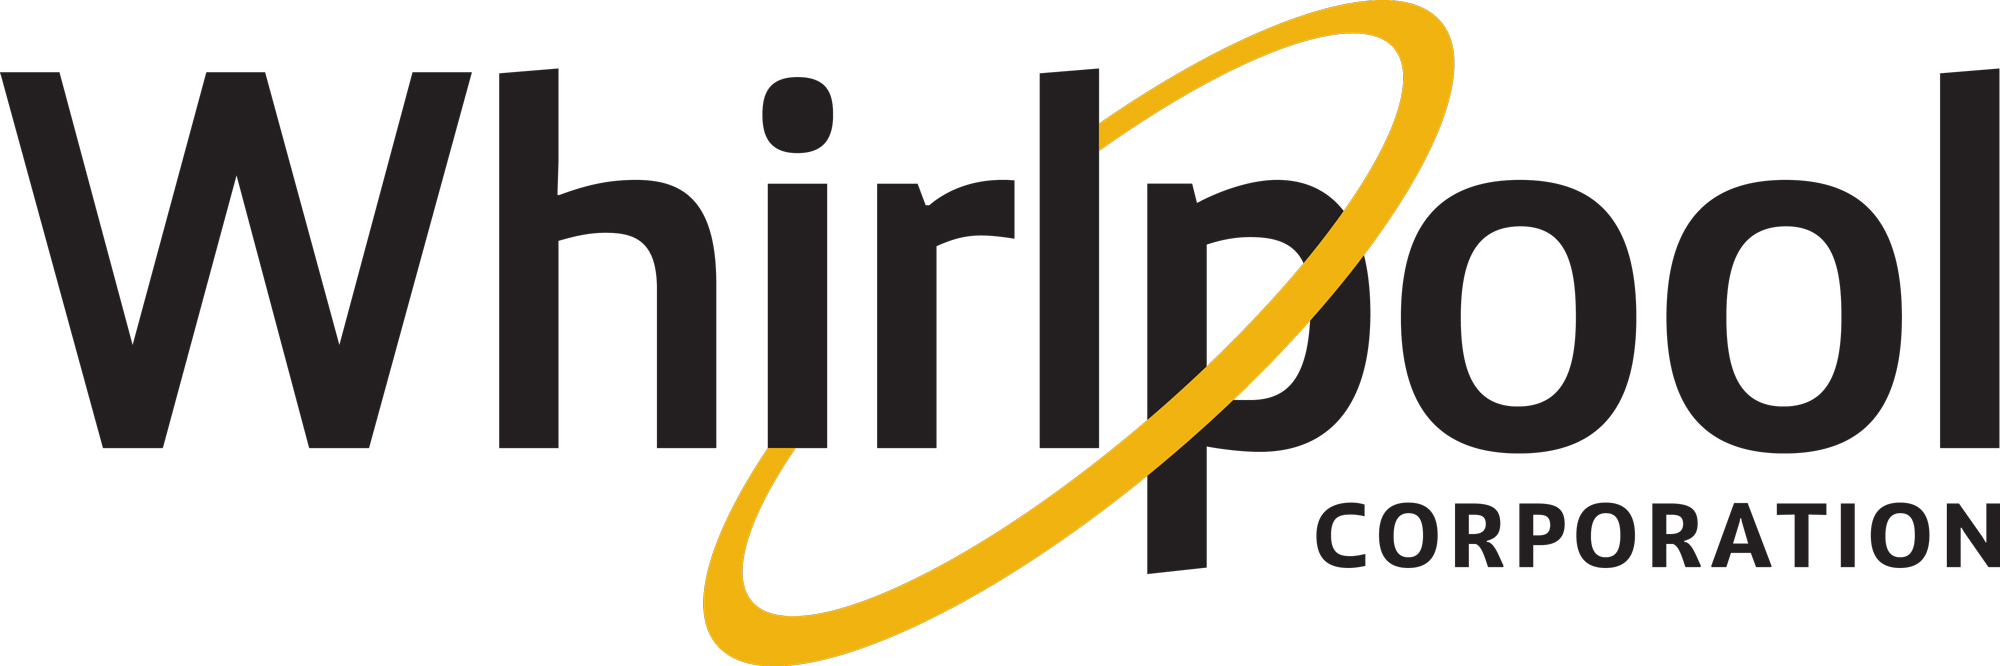 Link to Whirlpool Corporation's website